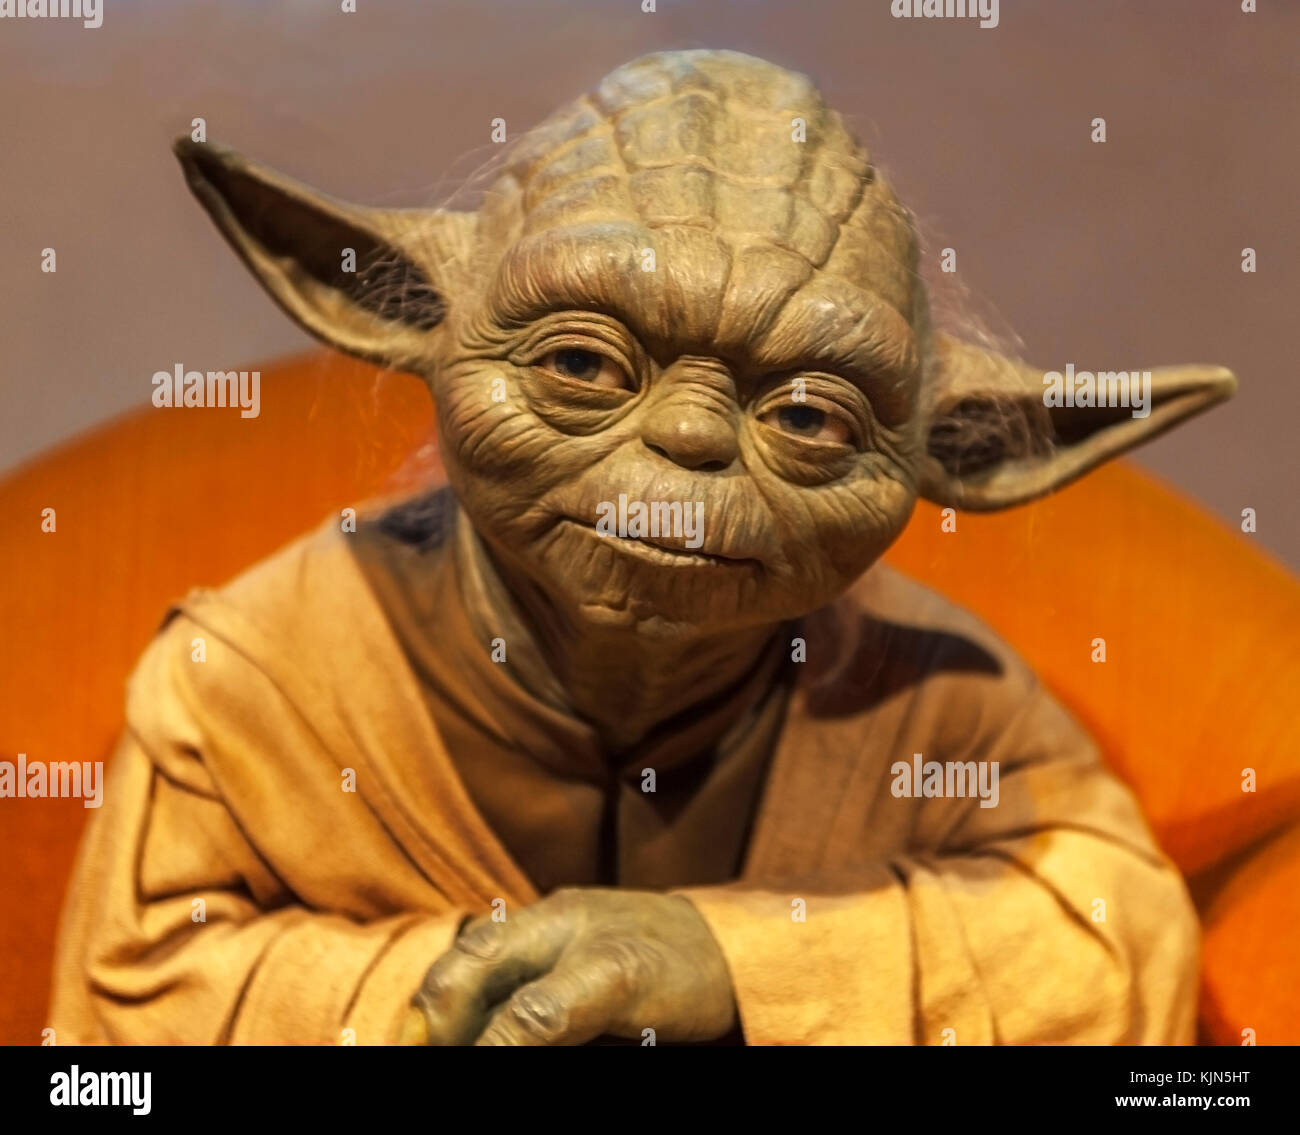 Berlin, Germany - March 2017: Master Yoda  wax figure in Madame Tussaud's museum Stock Photo